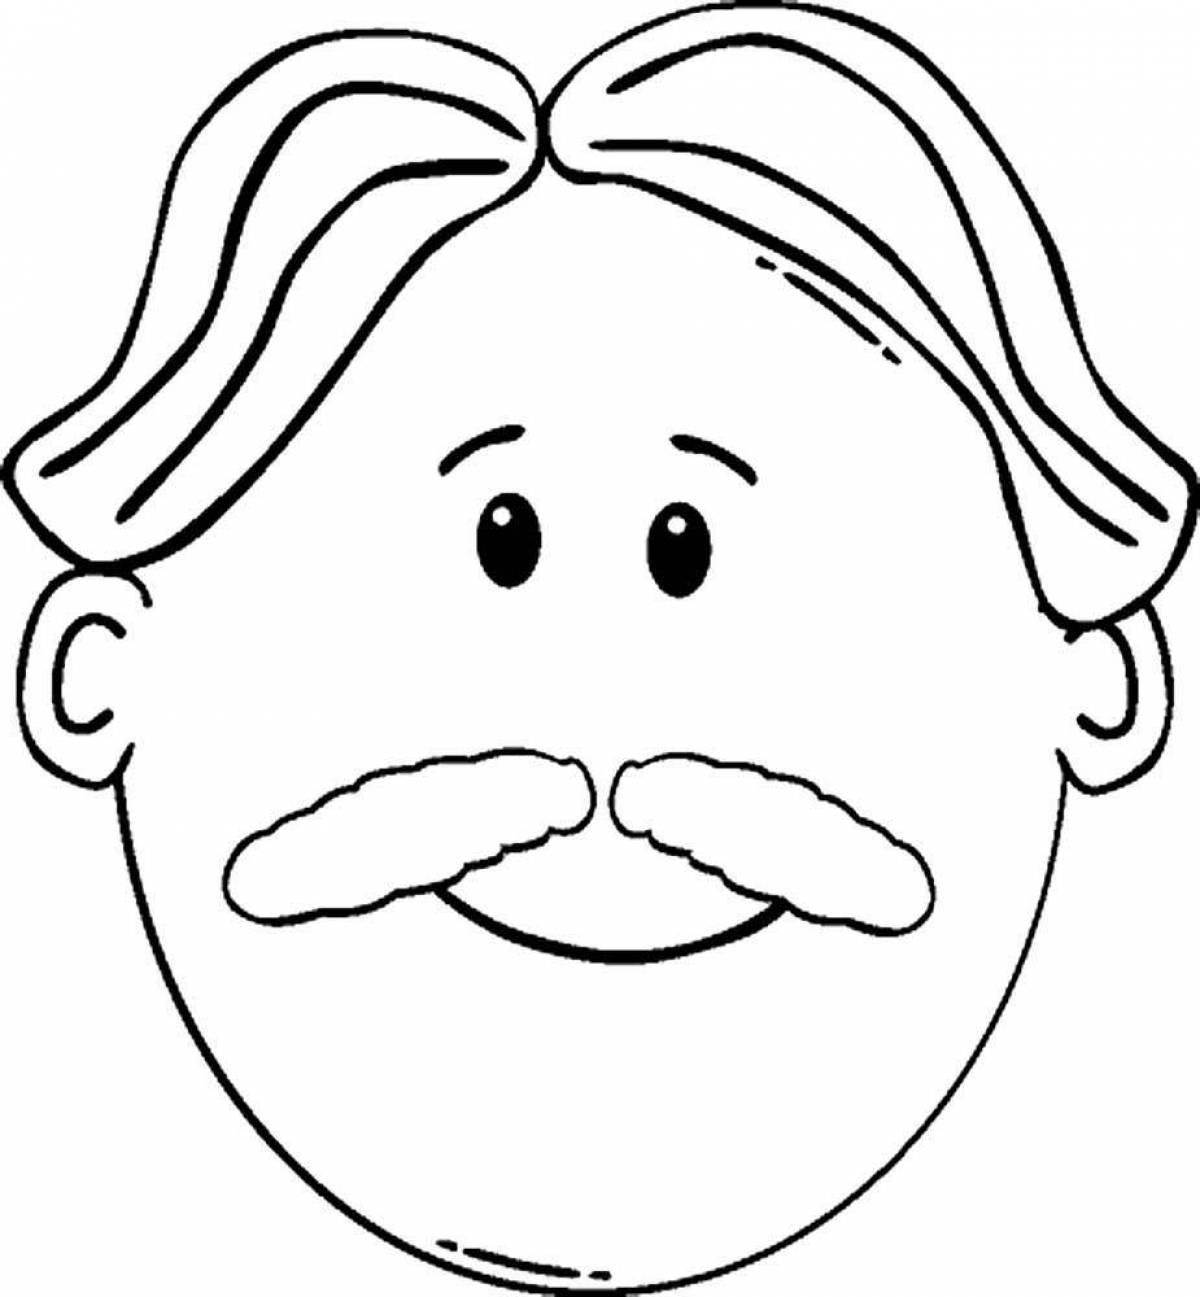 Colorful mustache coloring page for kids of all ages